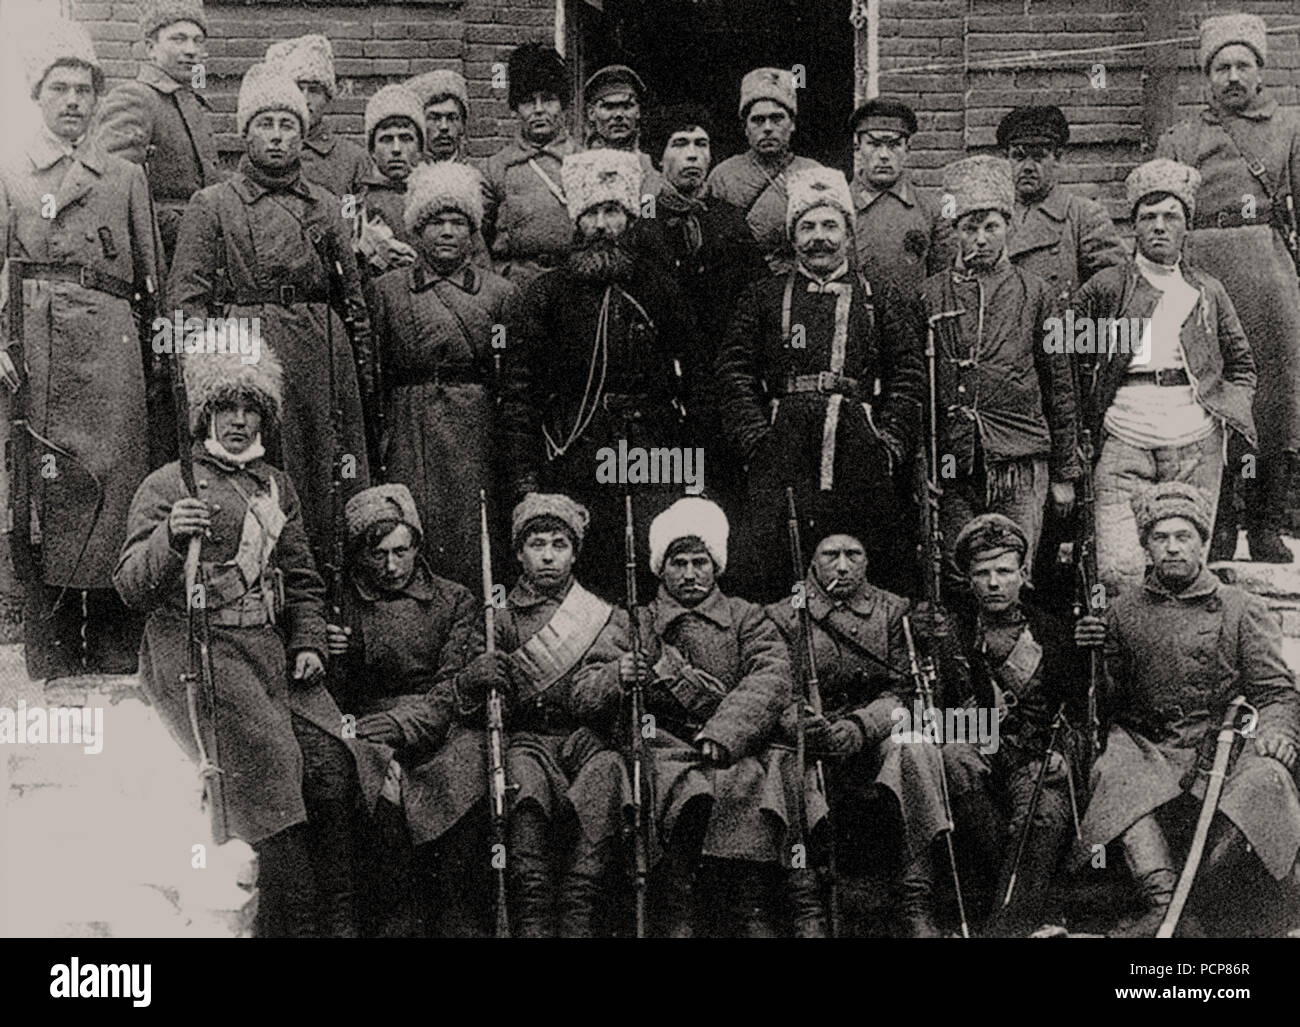 The Tambov rebel forces , 1920. Stock Photo